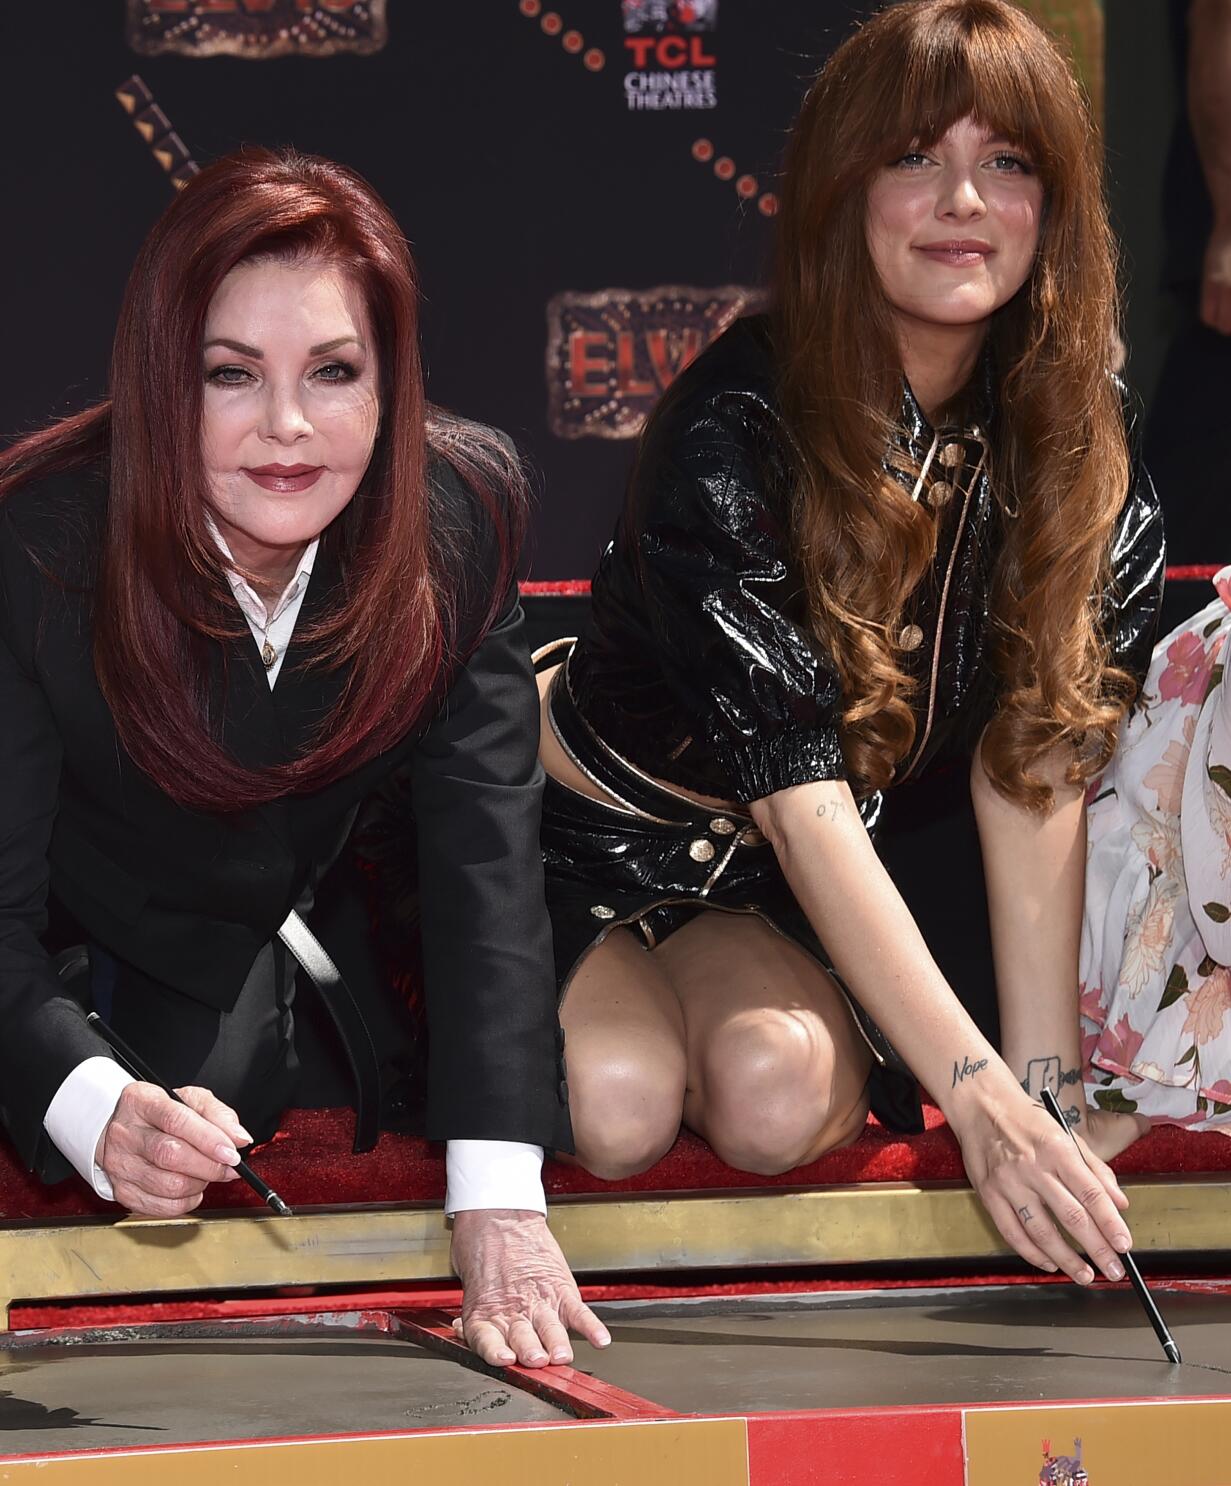 Priscilla Presley On the Story Behind the Famous Photo of Her